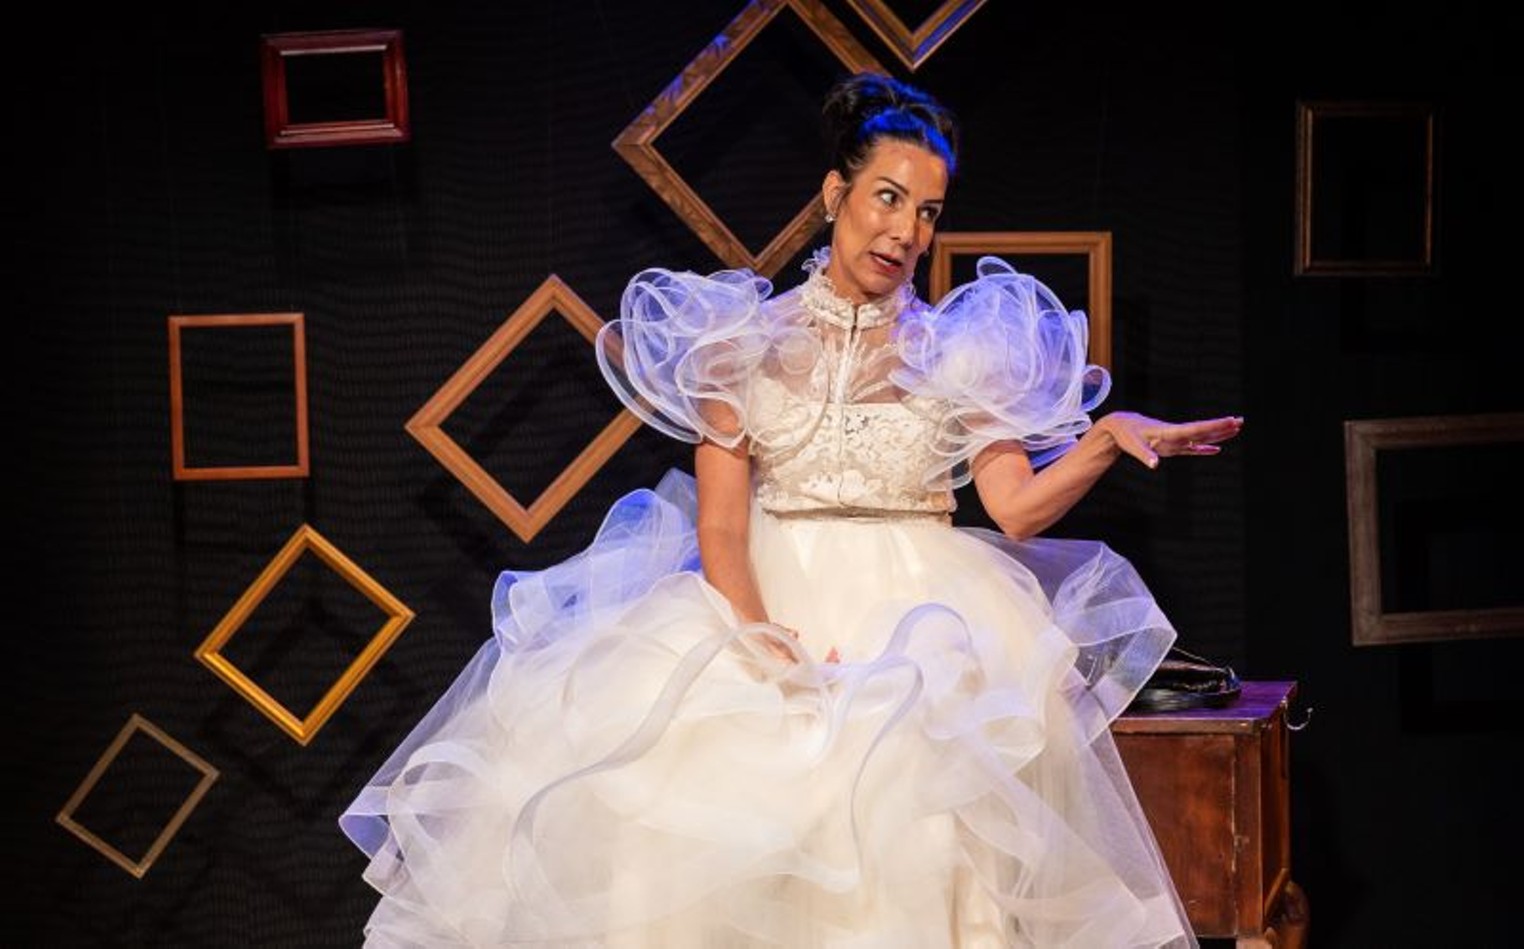 Preview: The Bride at Stages at The Gordy